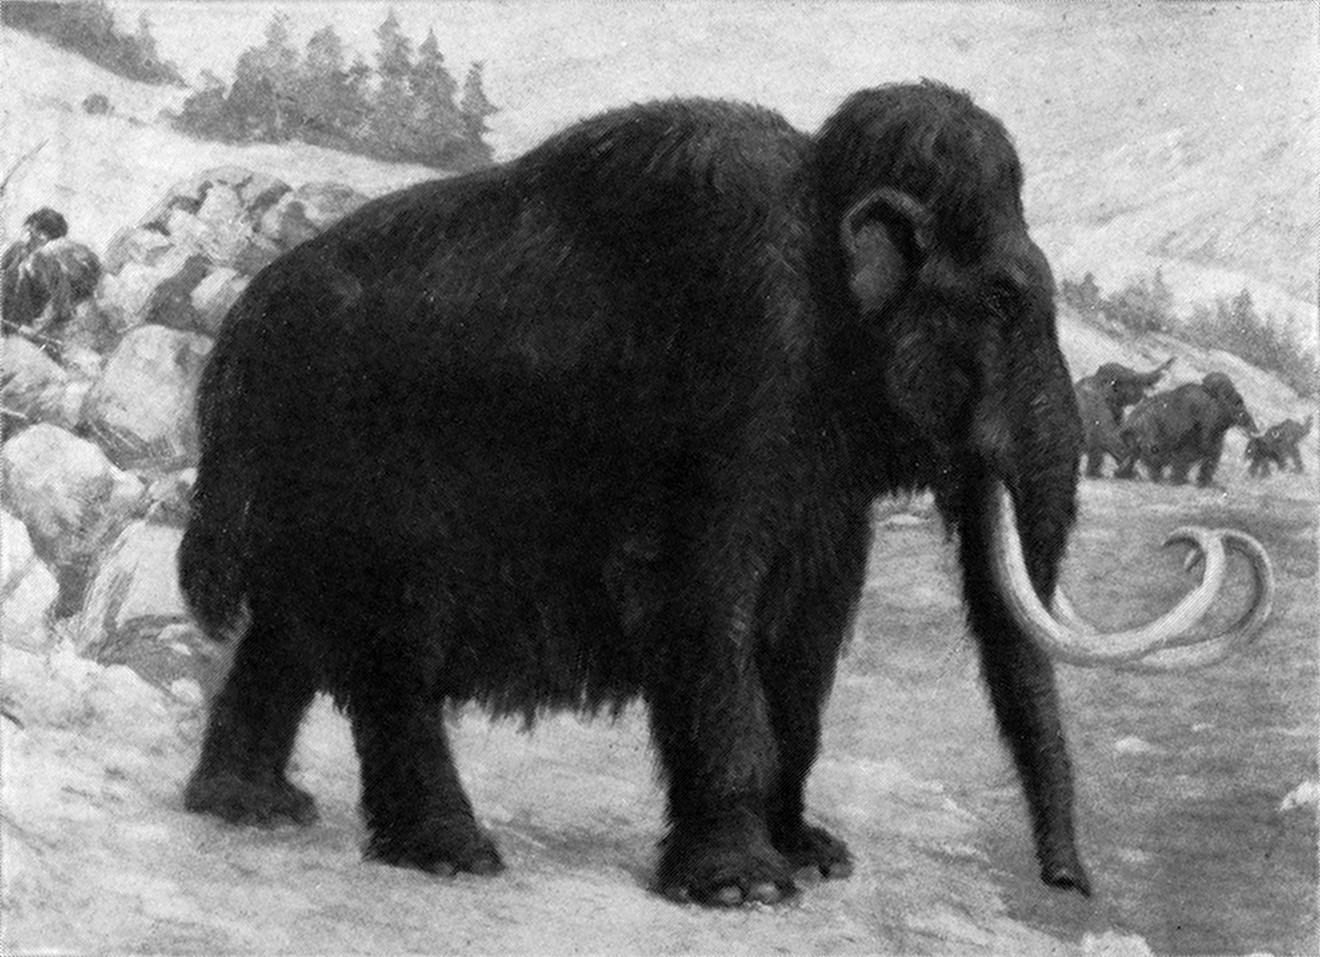 New century, who dis? The Wooly Mammoth has been MIA for a while, but a Dallas lab says it's resurrecting the prehistoric creature.